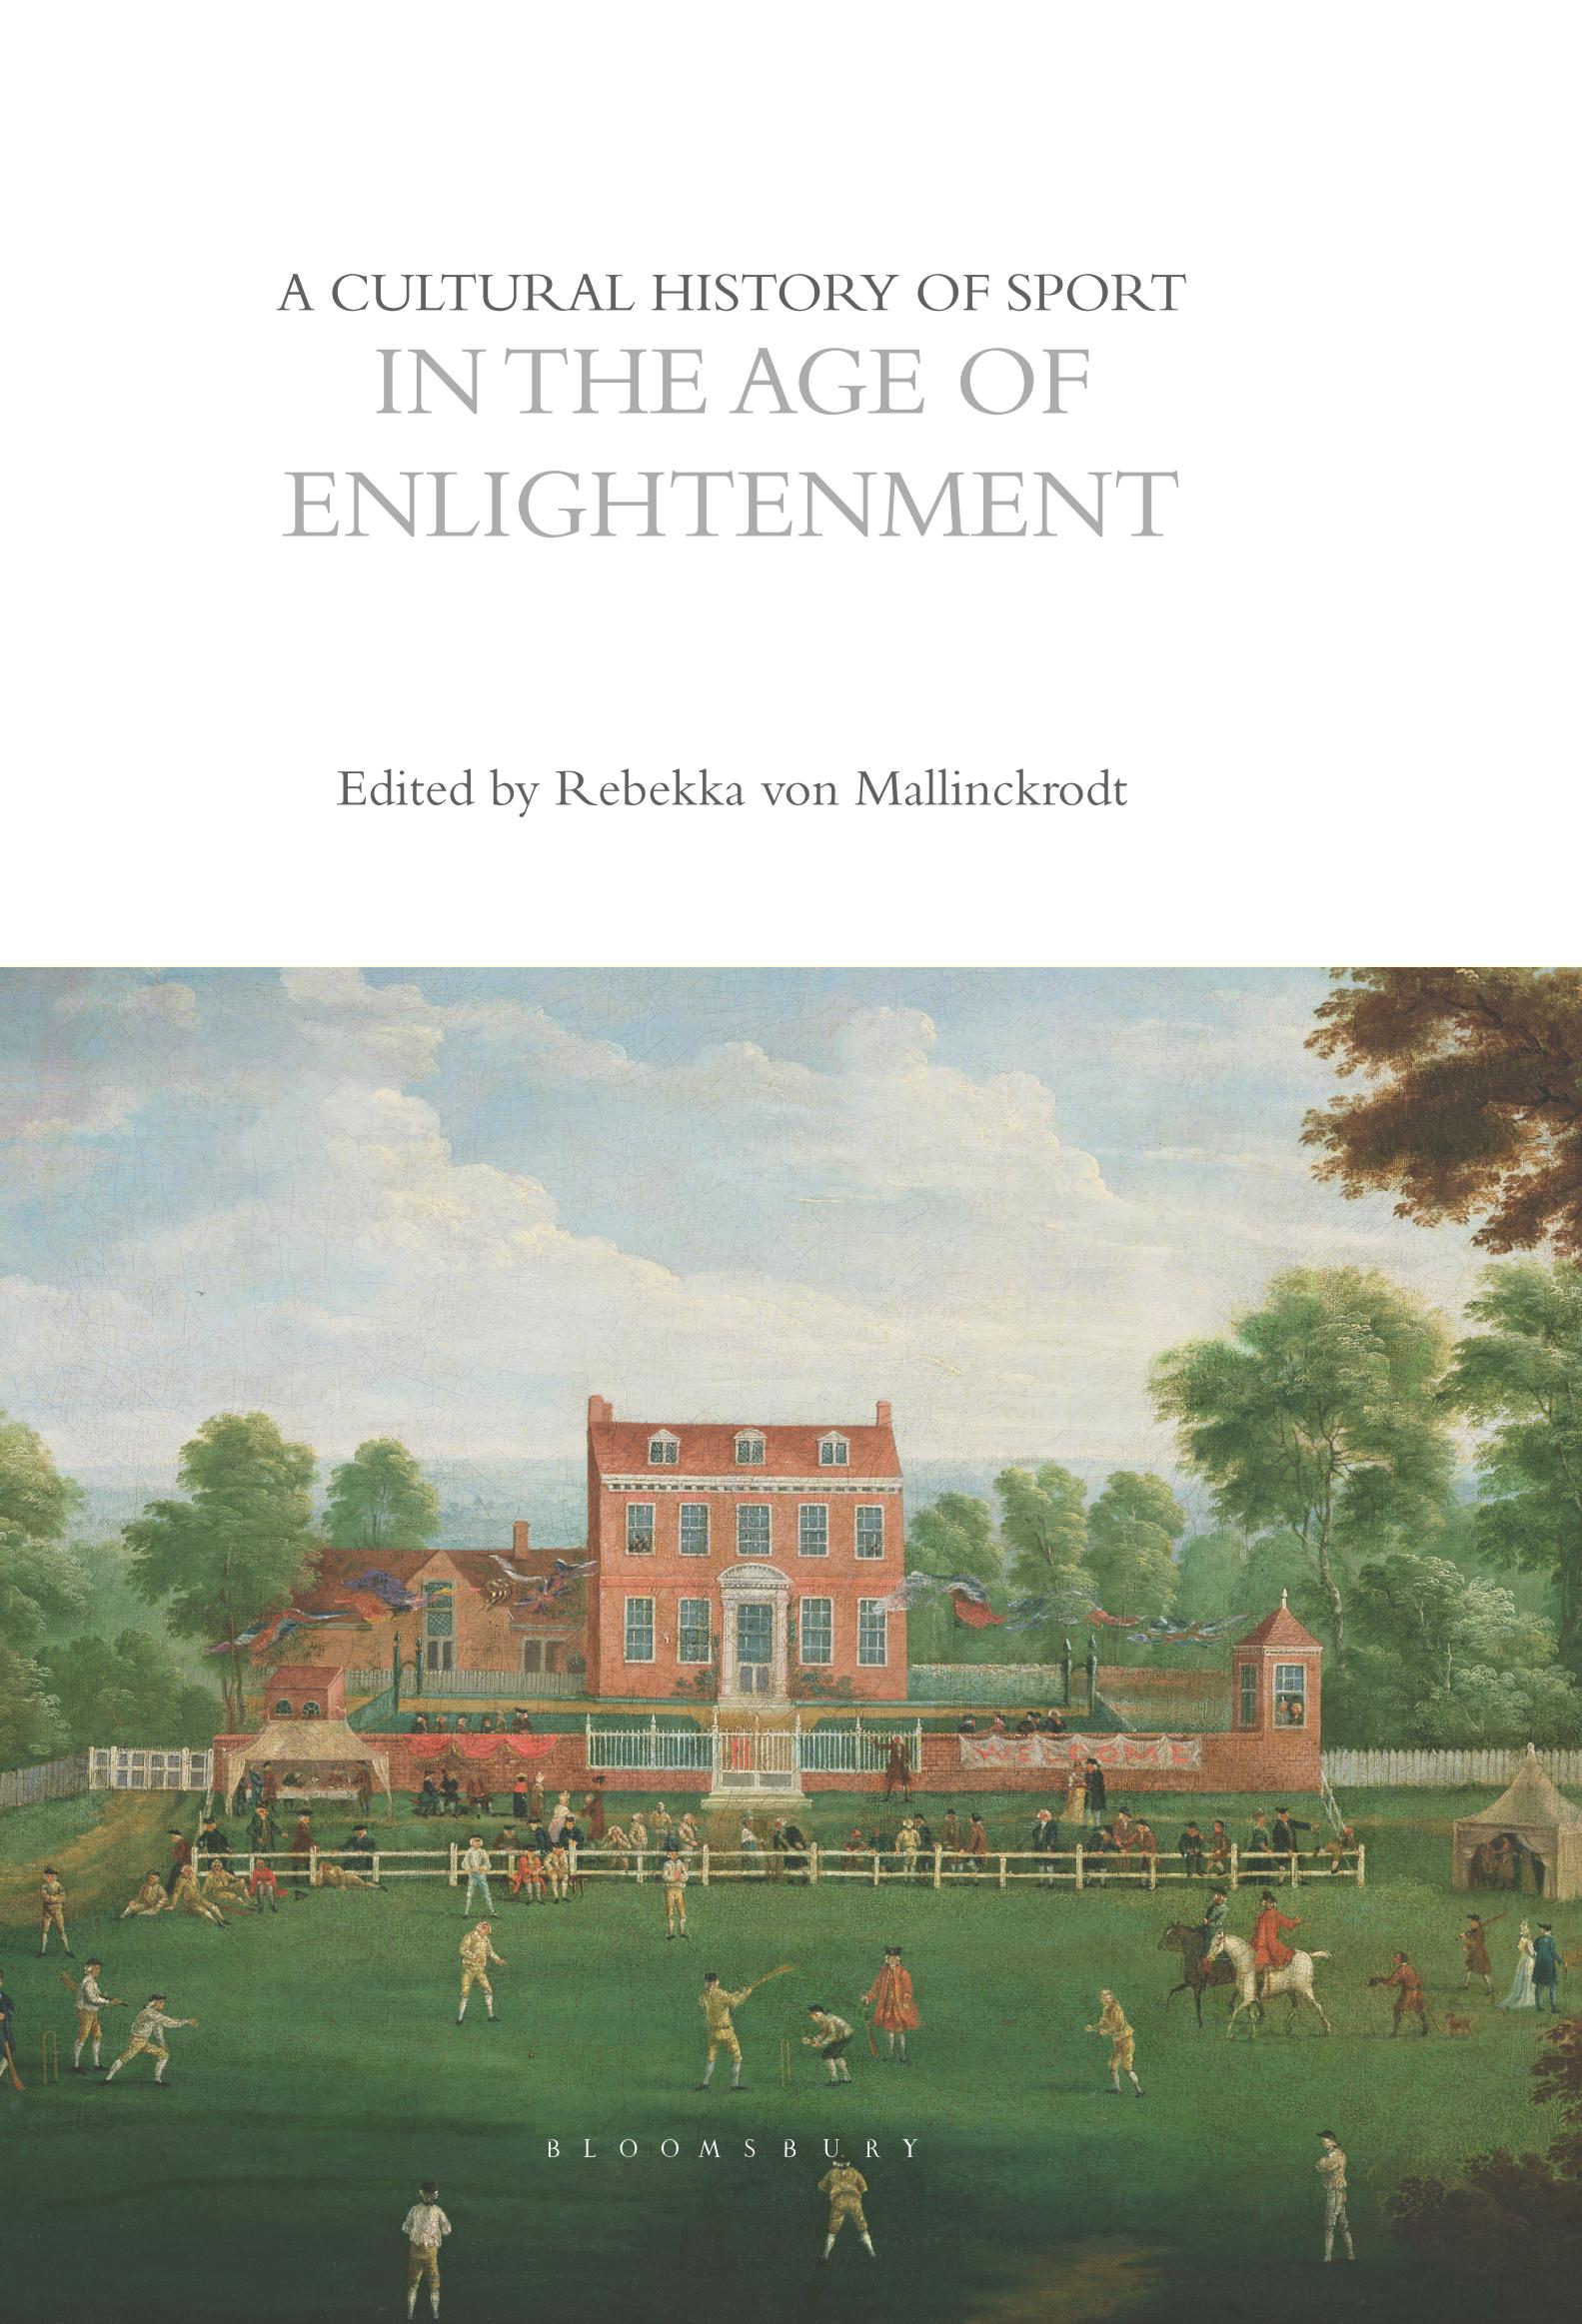 A Cultural History of Sports in the Age of Enlightement 1650-1800